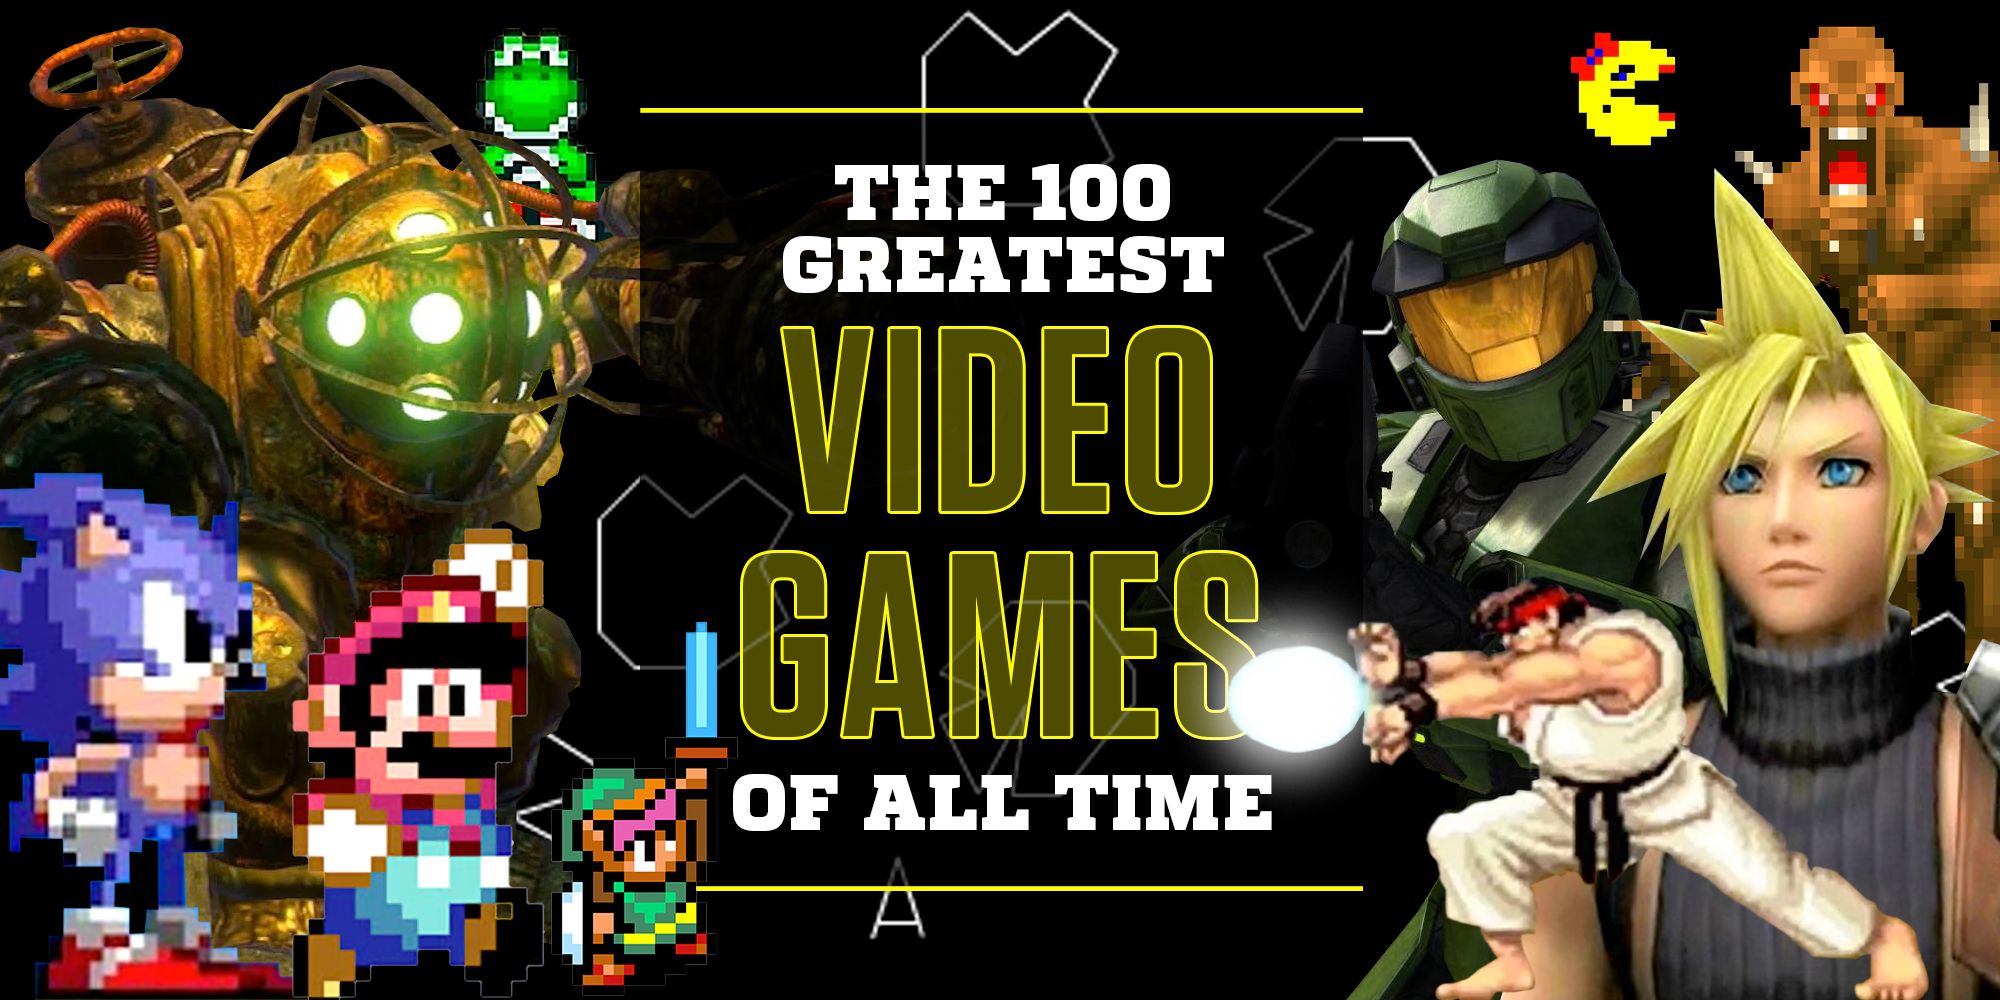 Greatest Video Games of All Time